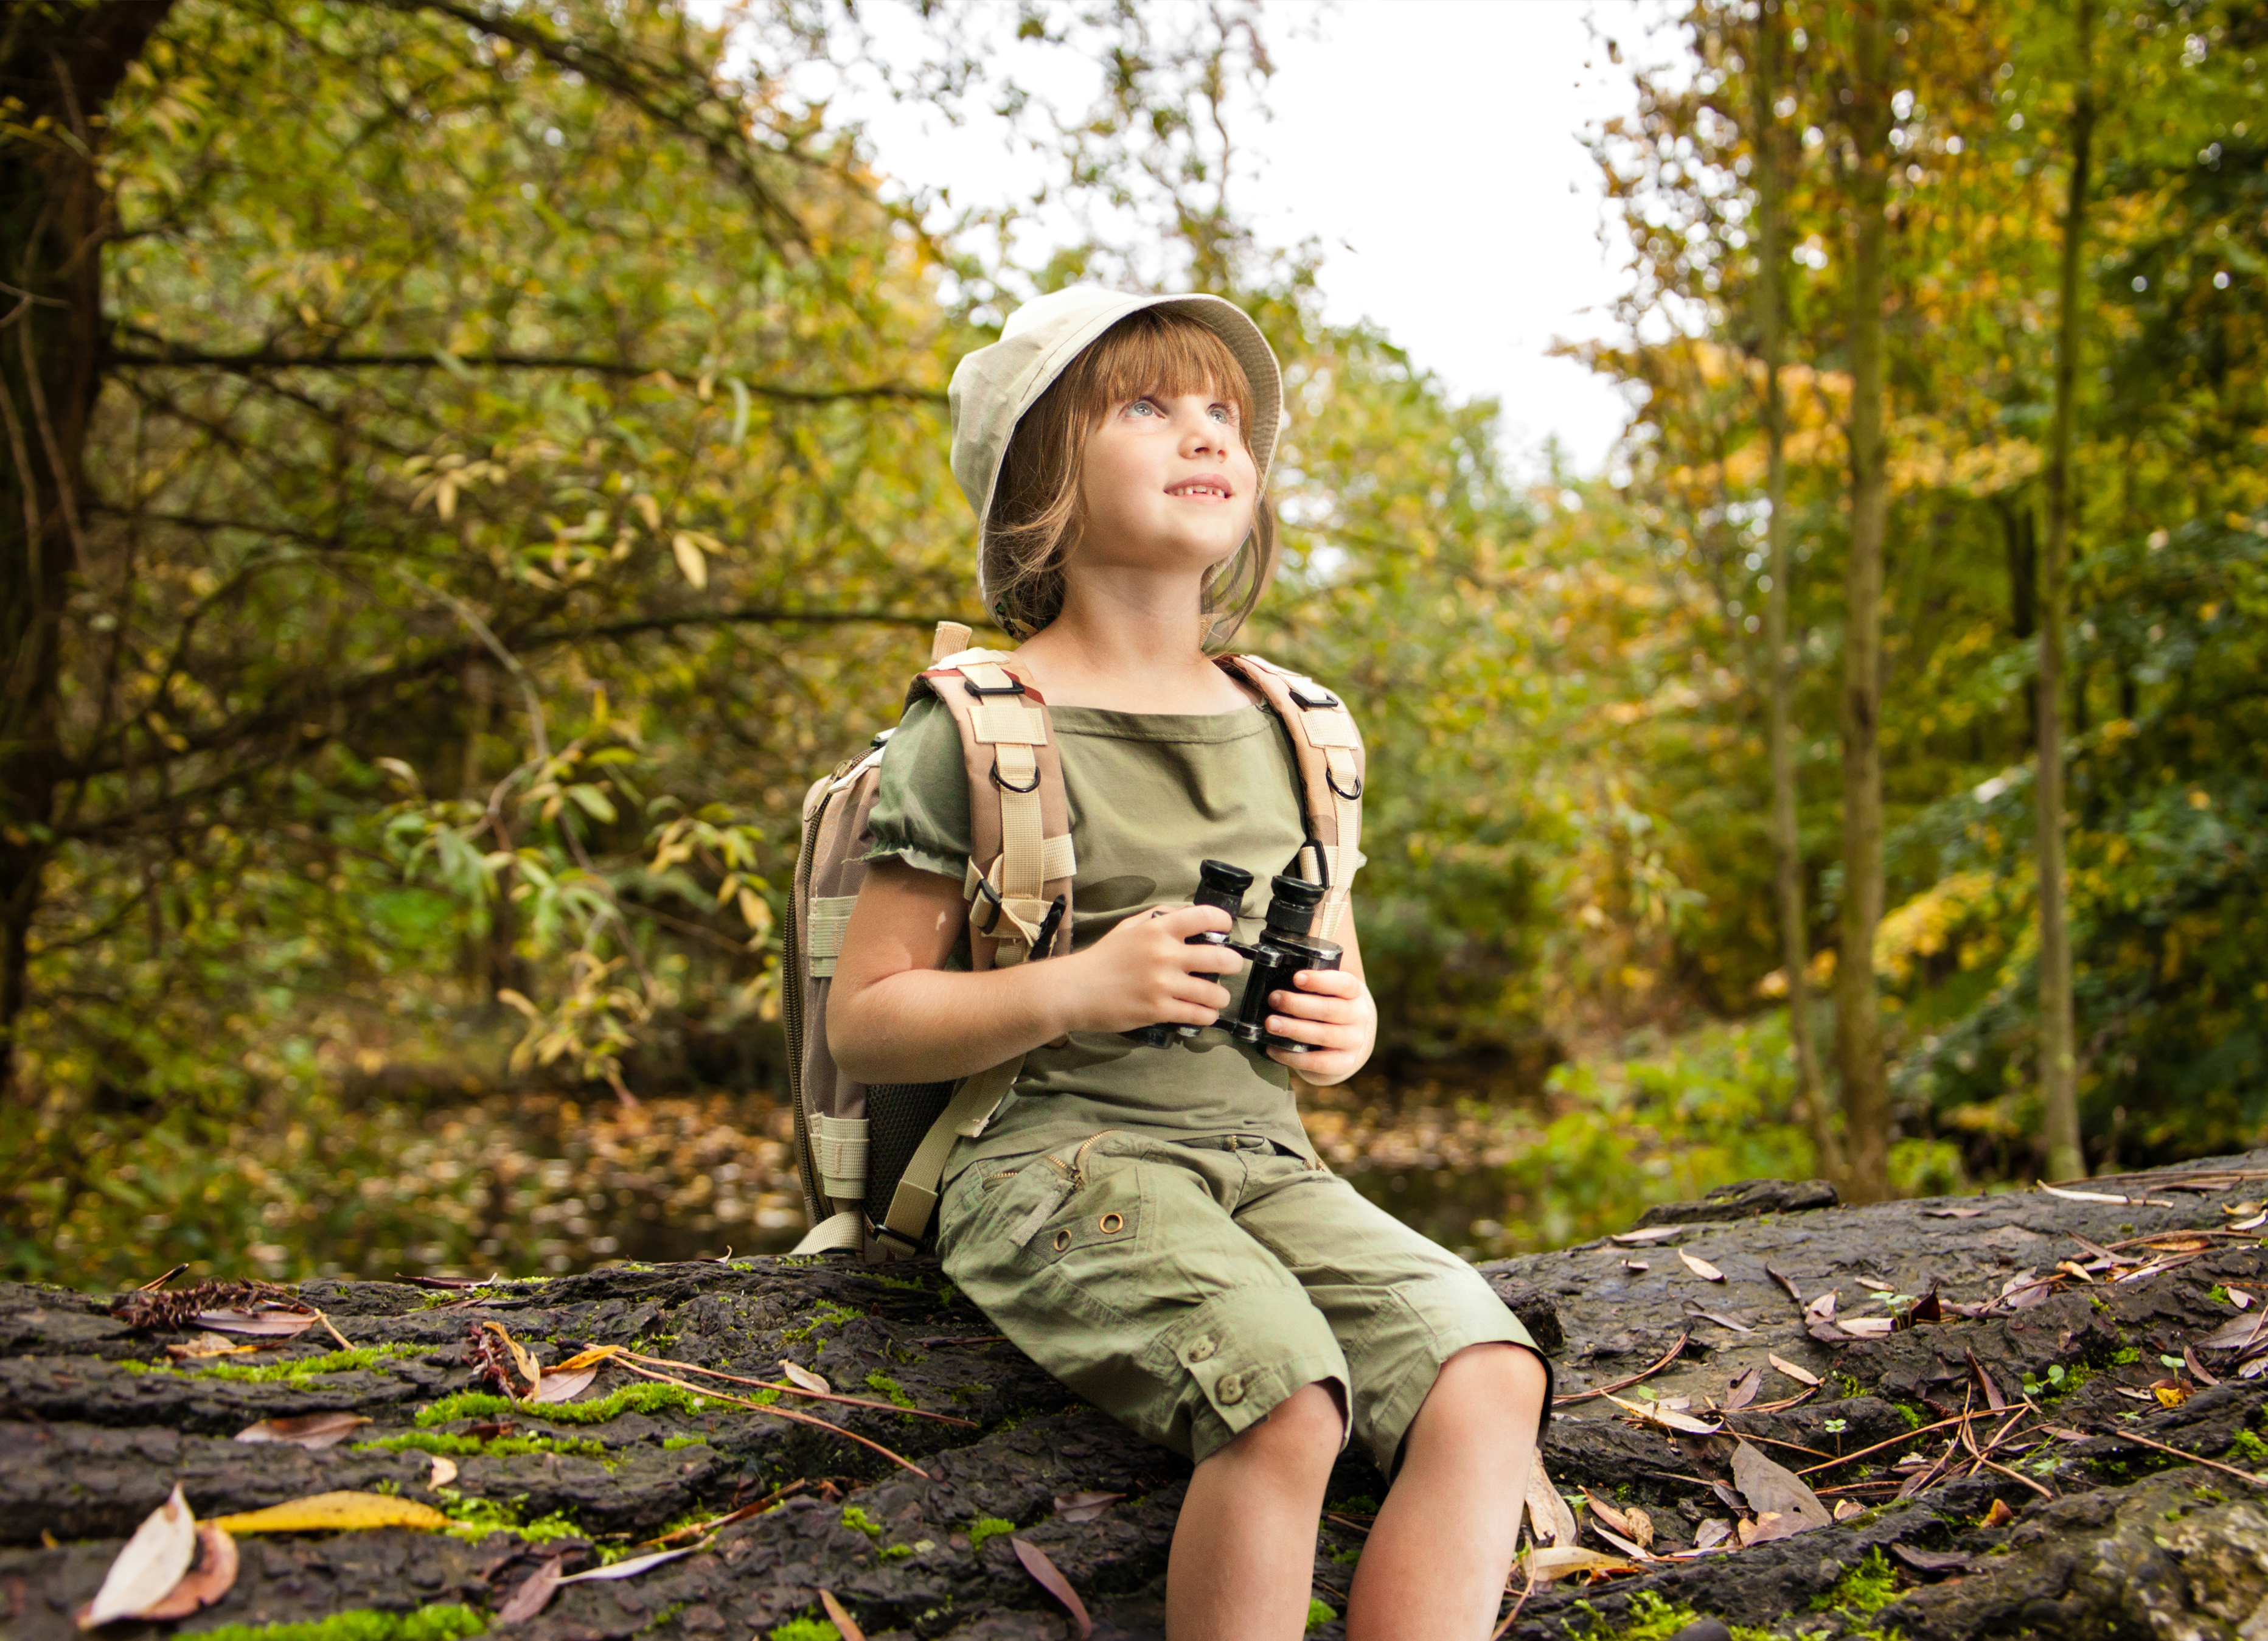 March 12 Special Events - Girl Scout Day. Girl sitting on a log in the forest holding a pair of binoculars and looking optimistically upwards. 